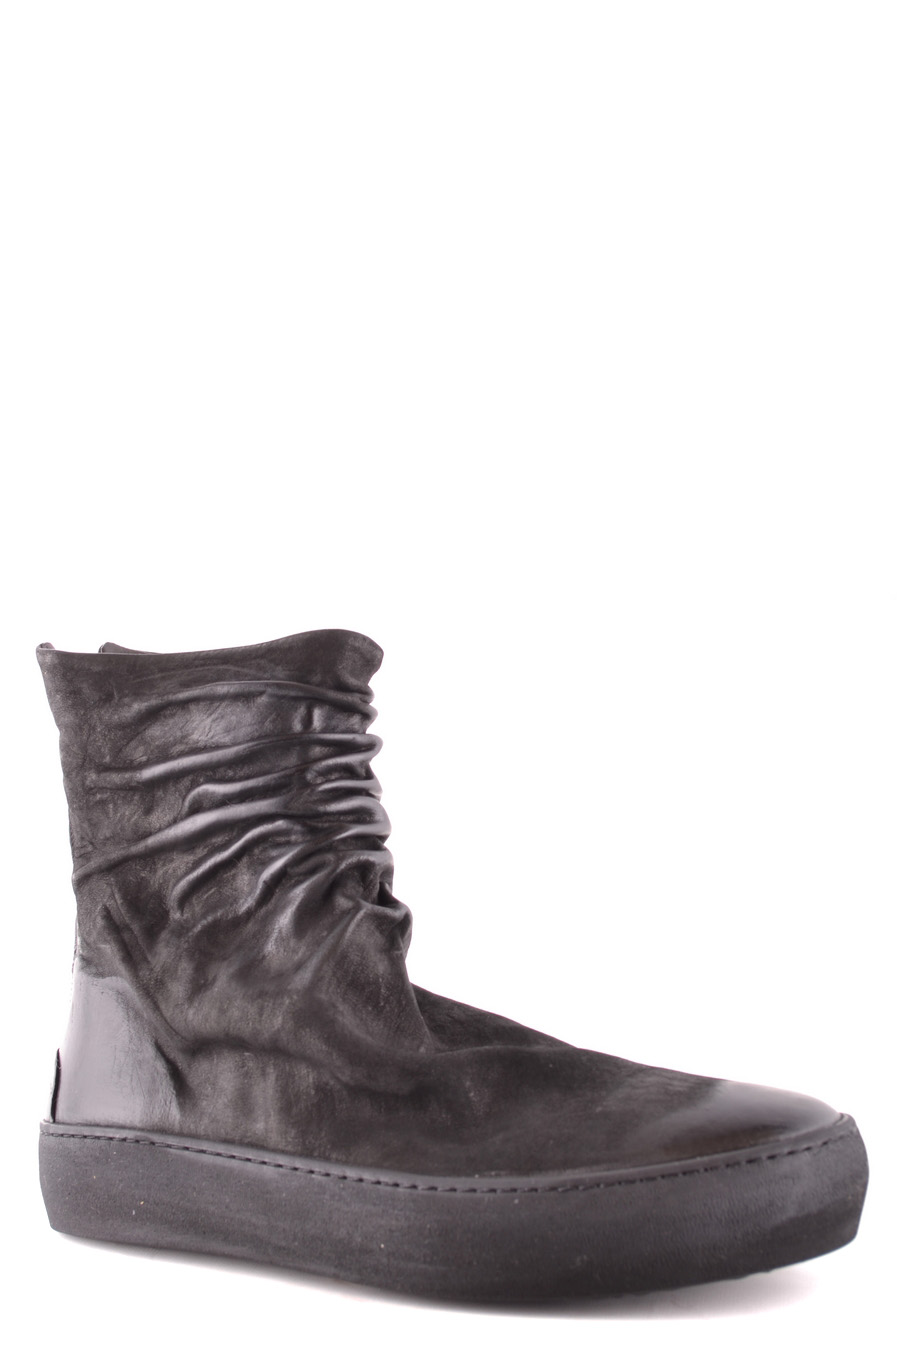 turnering sennep Clancy THE LAST CONSPIRACY Boots | ViganoBoutique.com